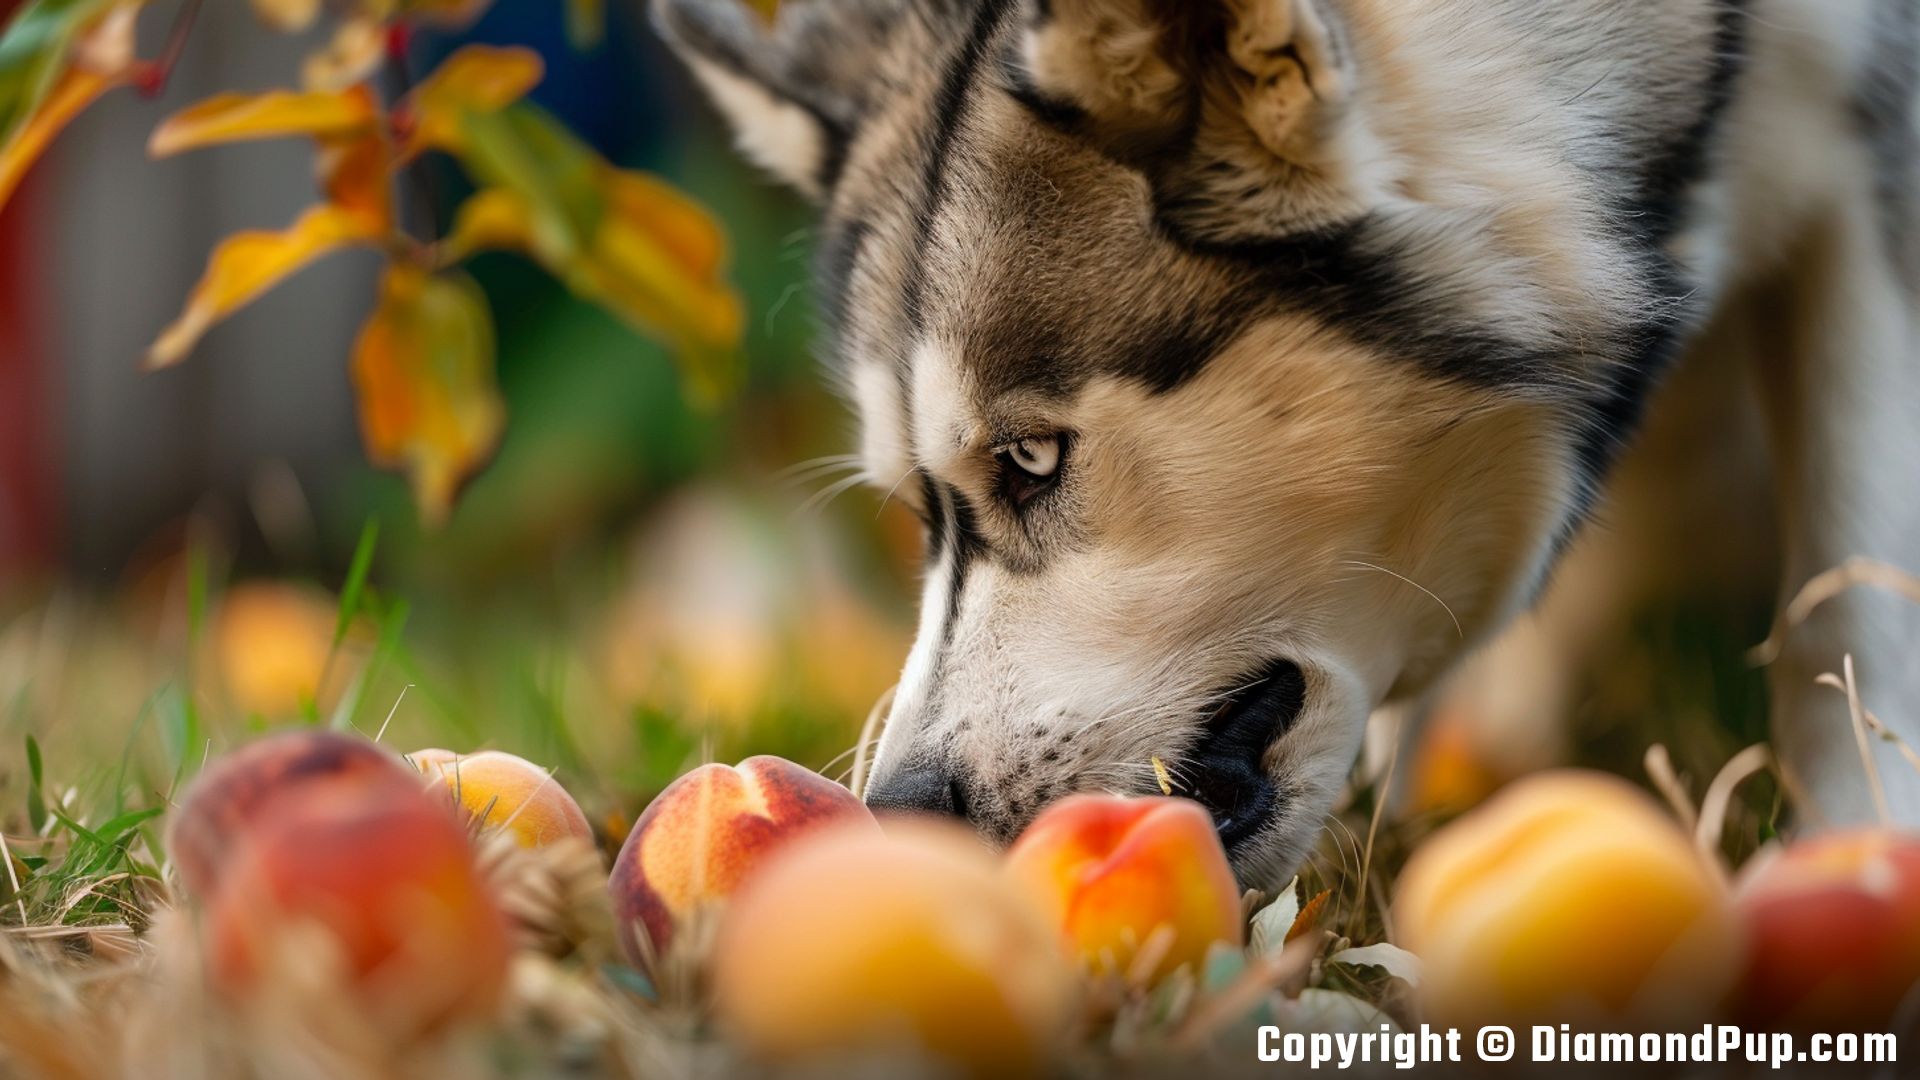 Image of a Cute Husky Eating Peaches